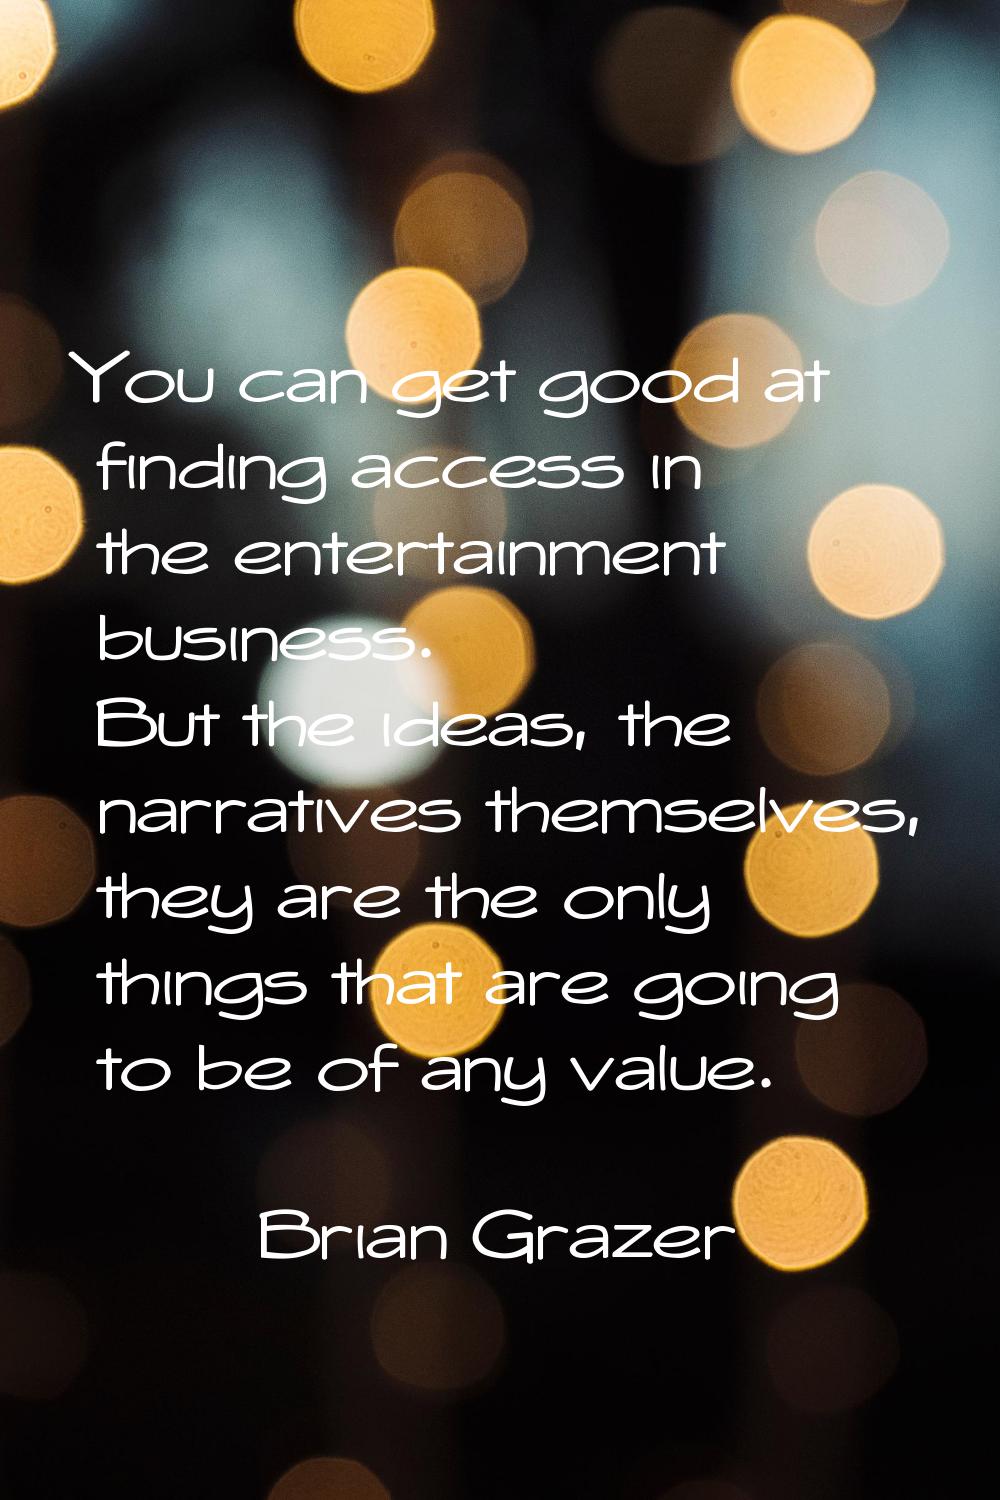 You can get good at finding access in the entertainment business. But the ideas, the narratives the